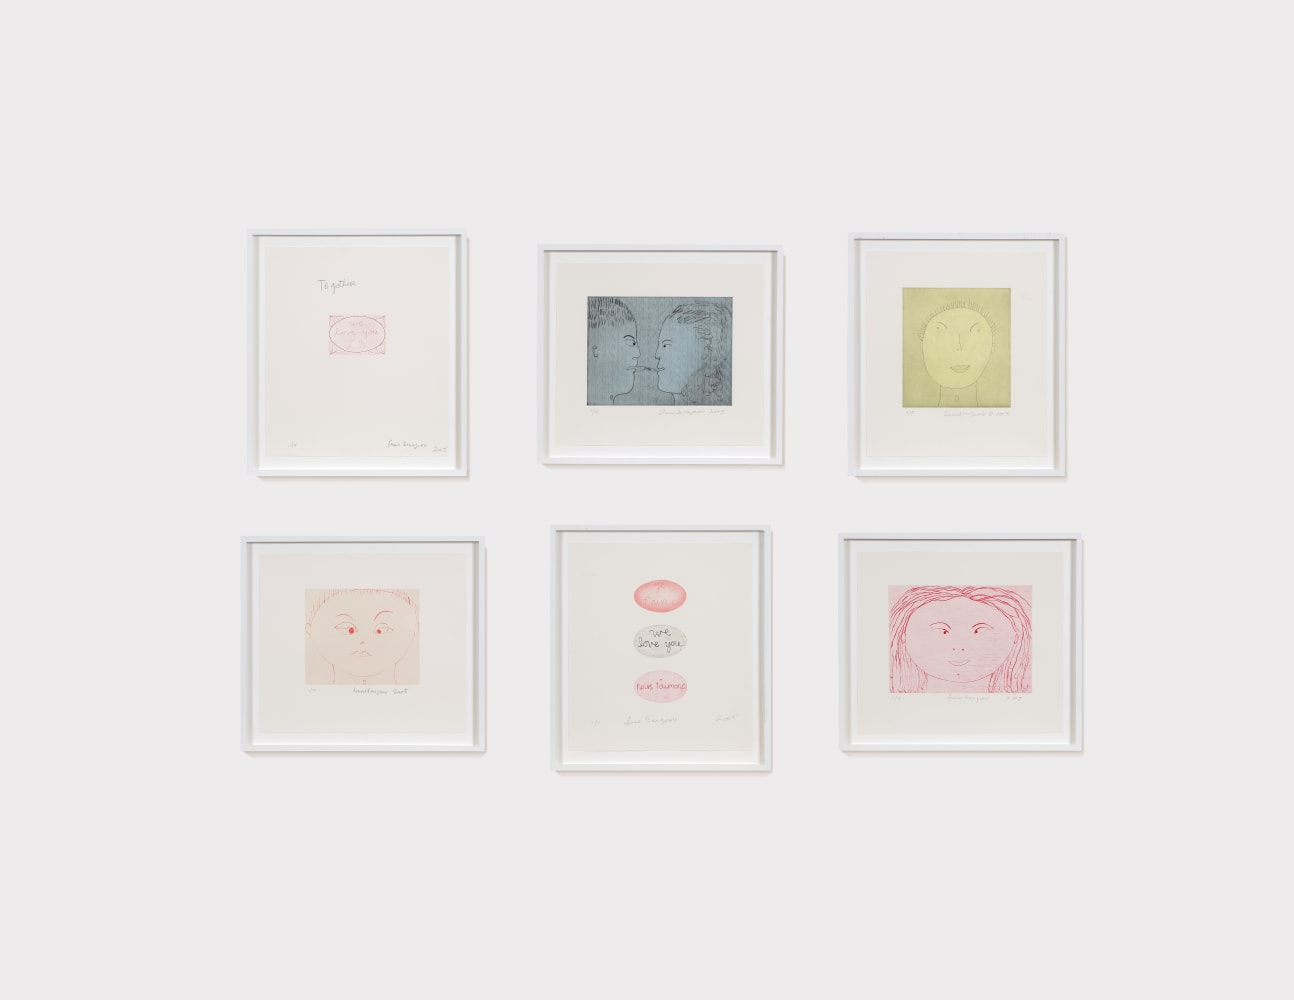 Louise Bourgeois

Together, 2005

portfolio of six drypoints and engravings, four with chine coll&amp;eacute;, ed. of 15

17 x 15 in. / 43.2 x 38.1 cm